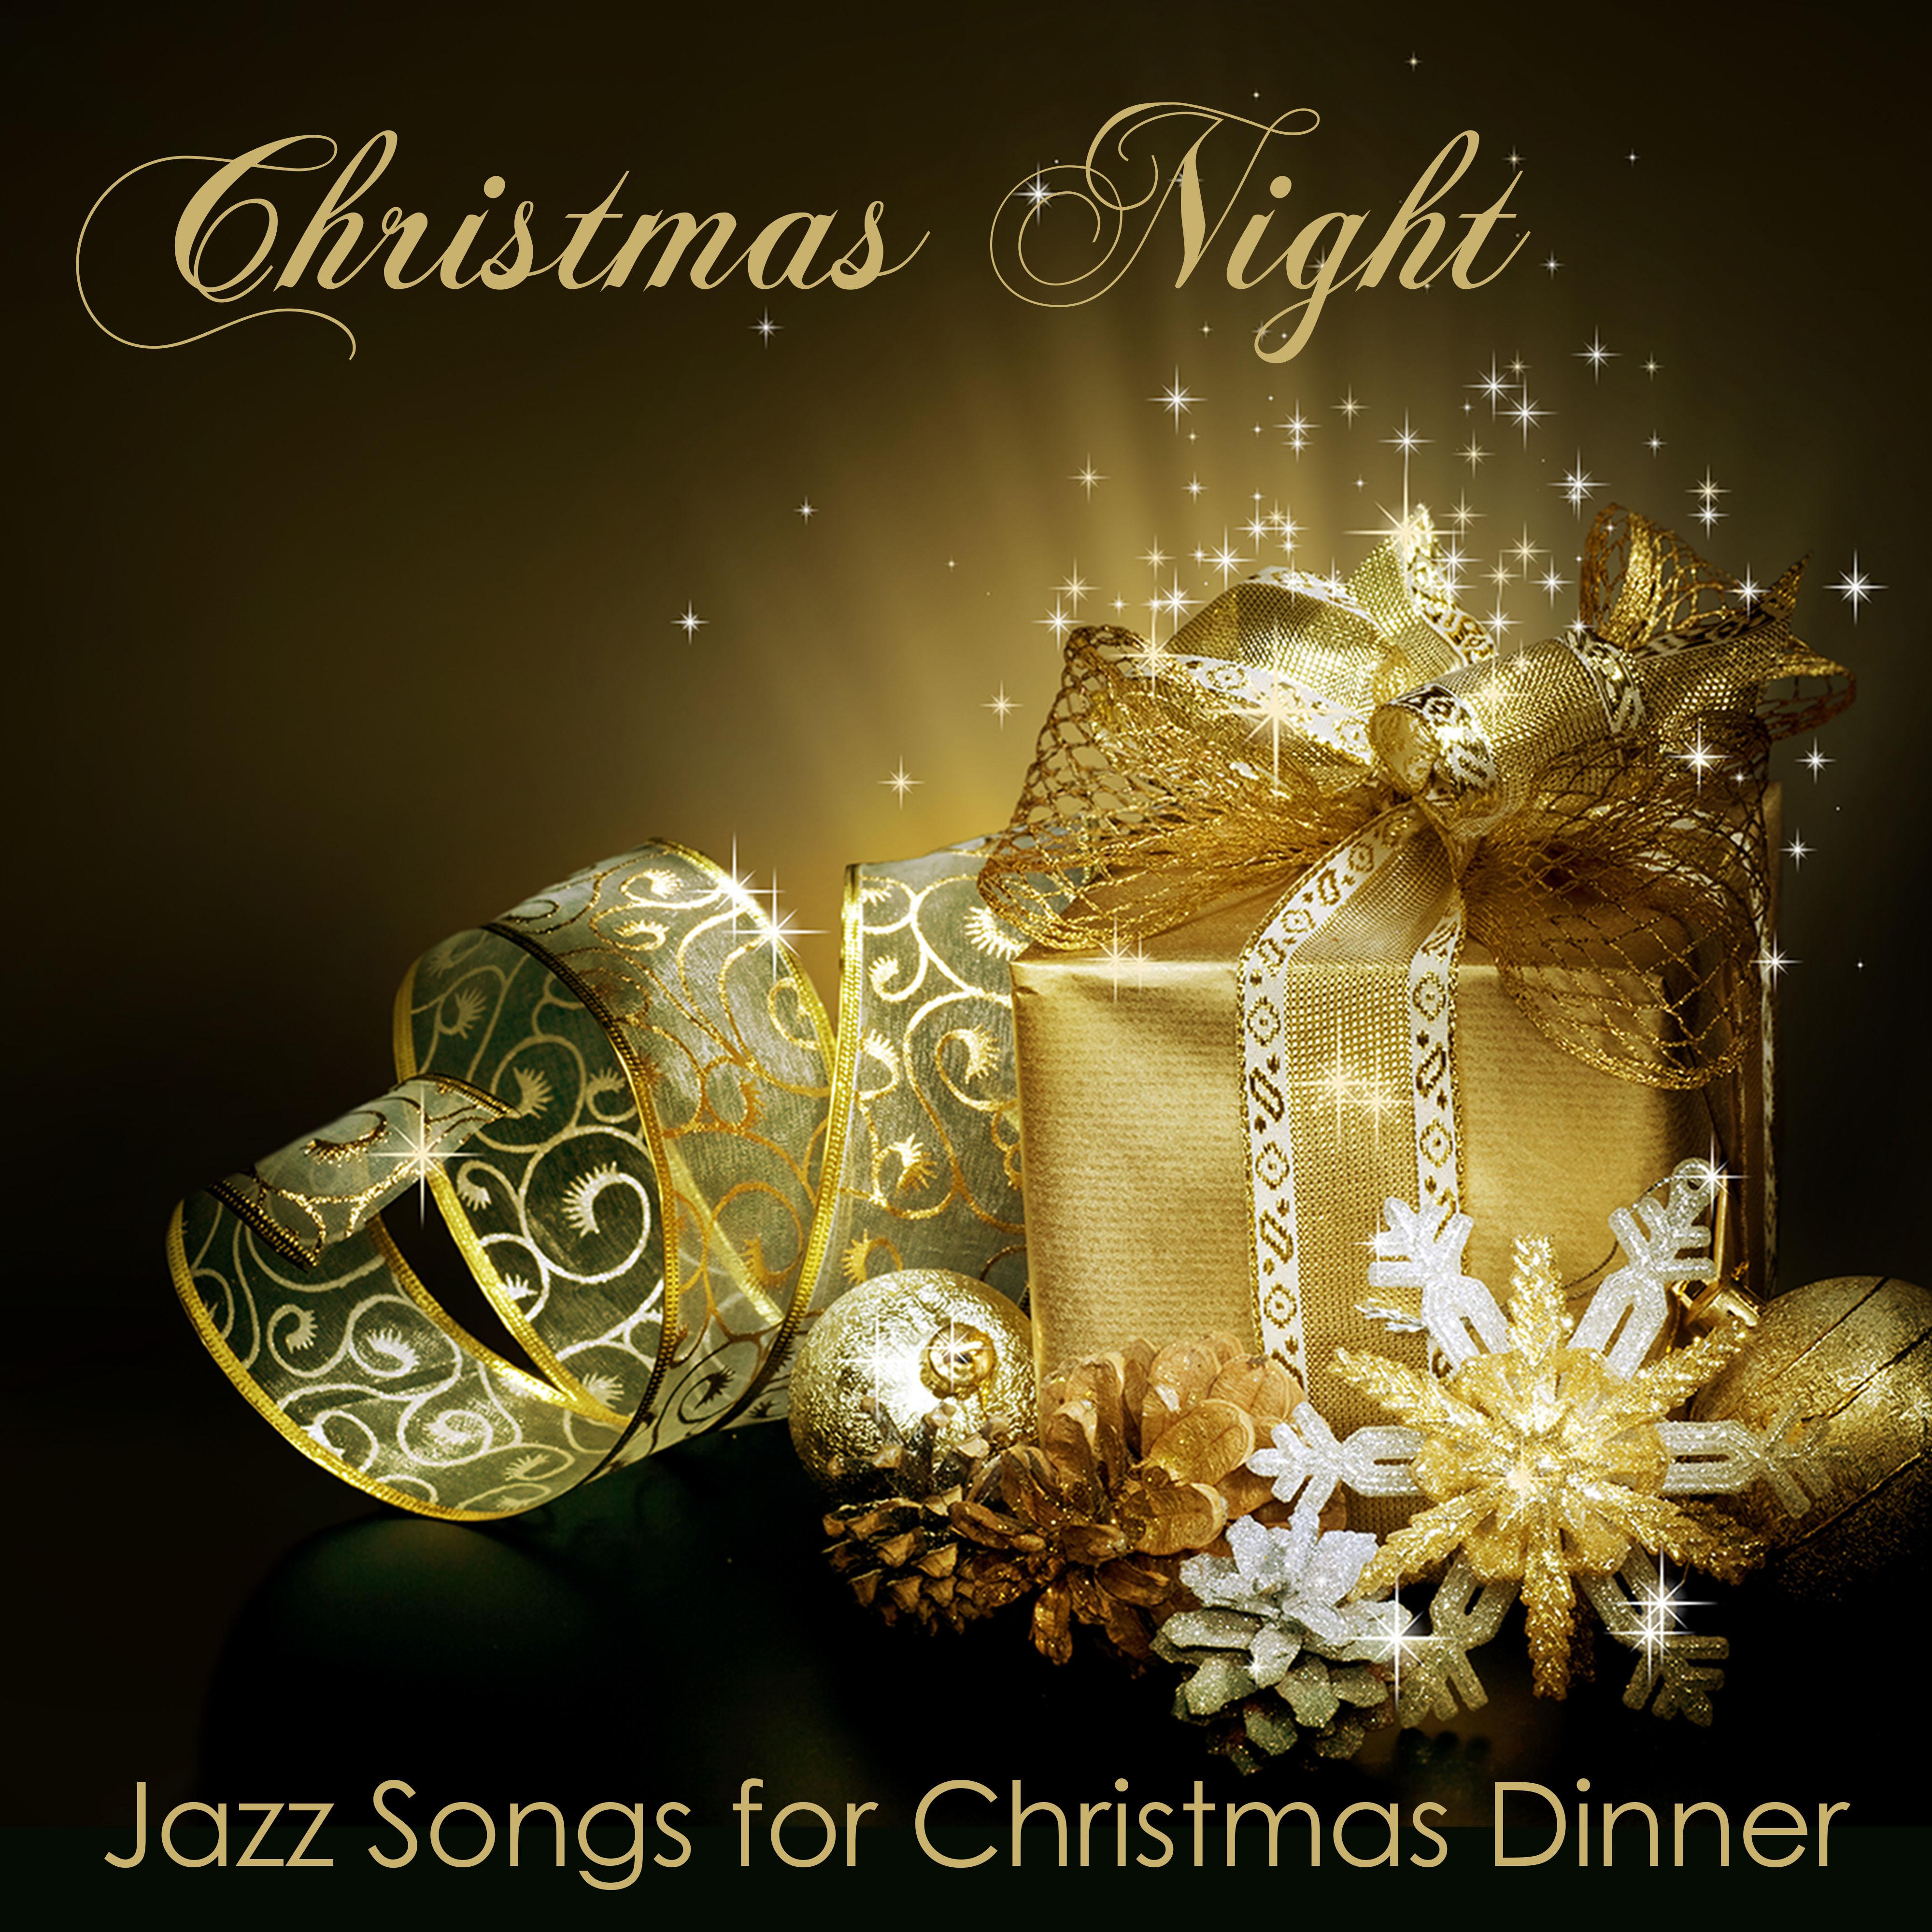 Christmas Night – Solo Piano Traditionals and Jazz Songs for Christmas Dinner & Piano Bar Music